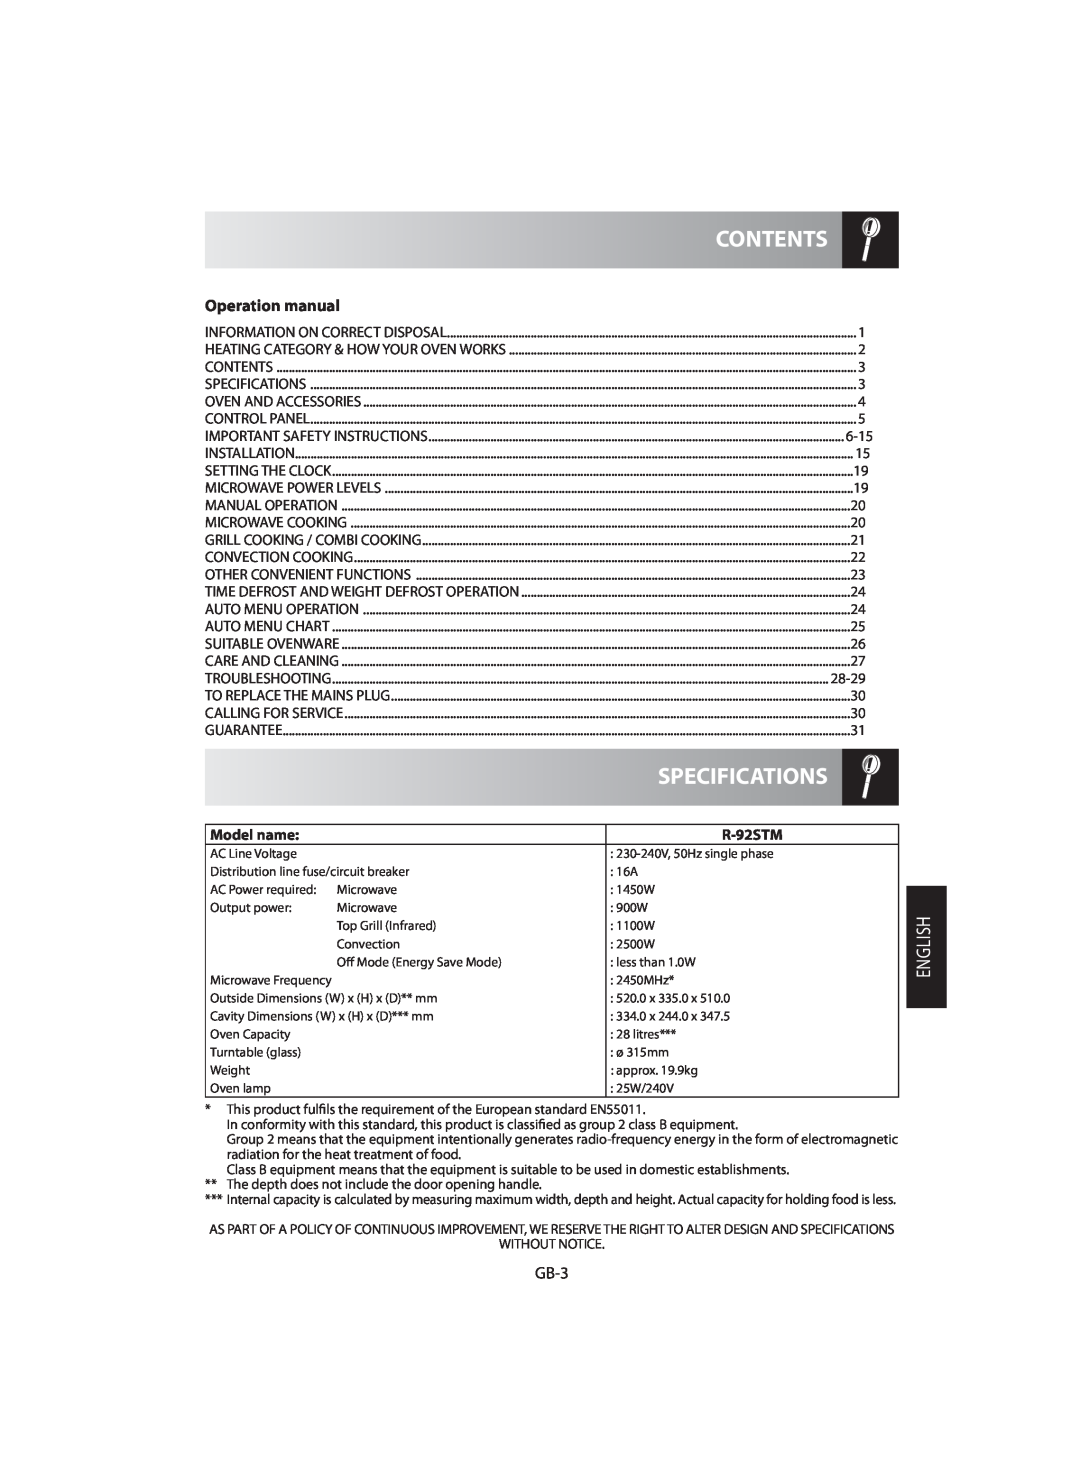 Sharp R-92STM operation manual Contents, Specifications, GB-3, Model name 